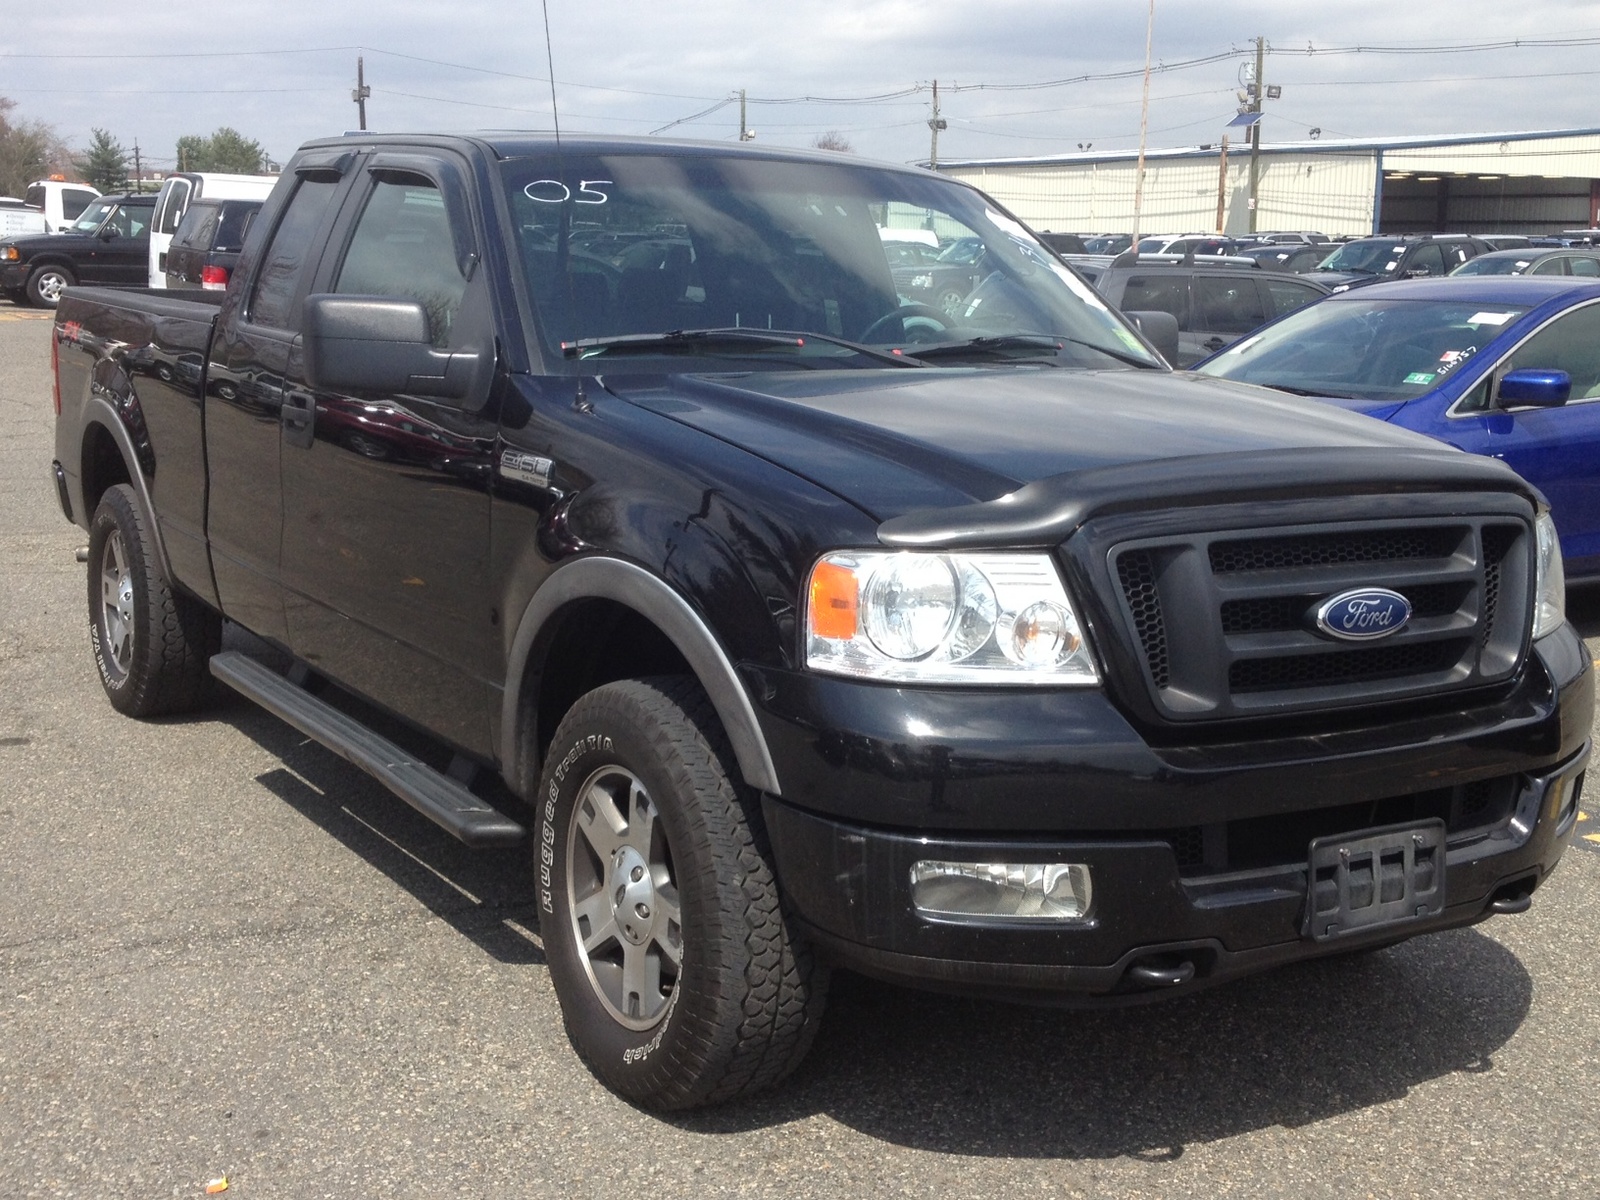 2005 Ford f150 lariat reviews #7